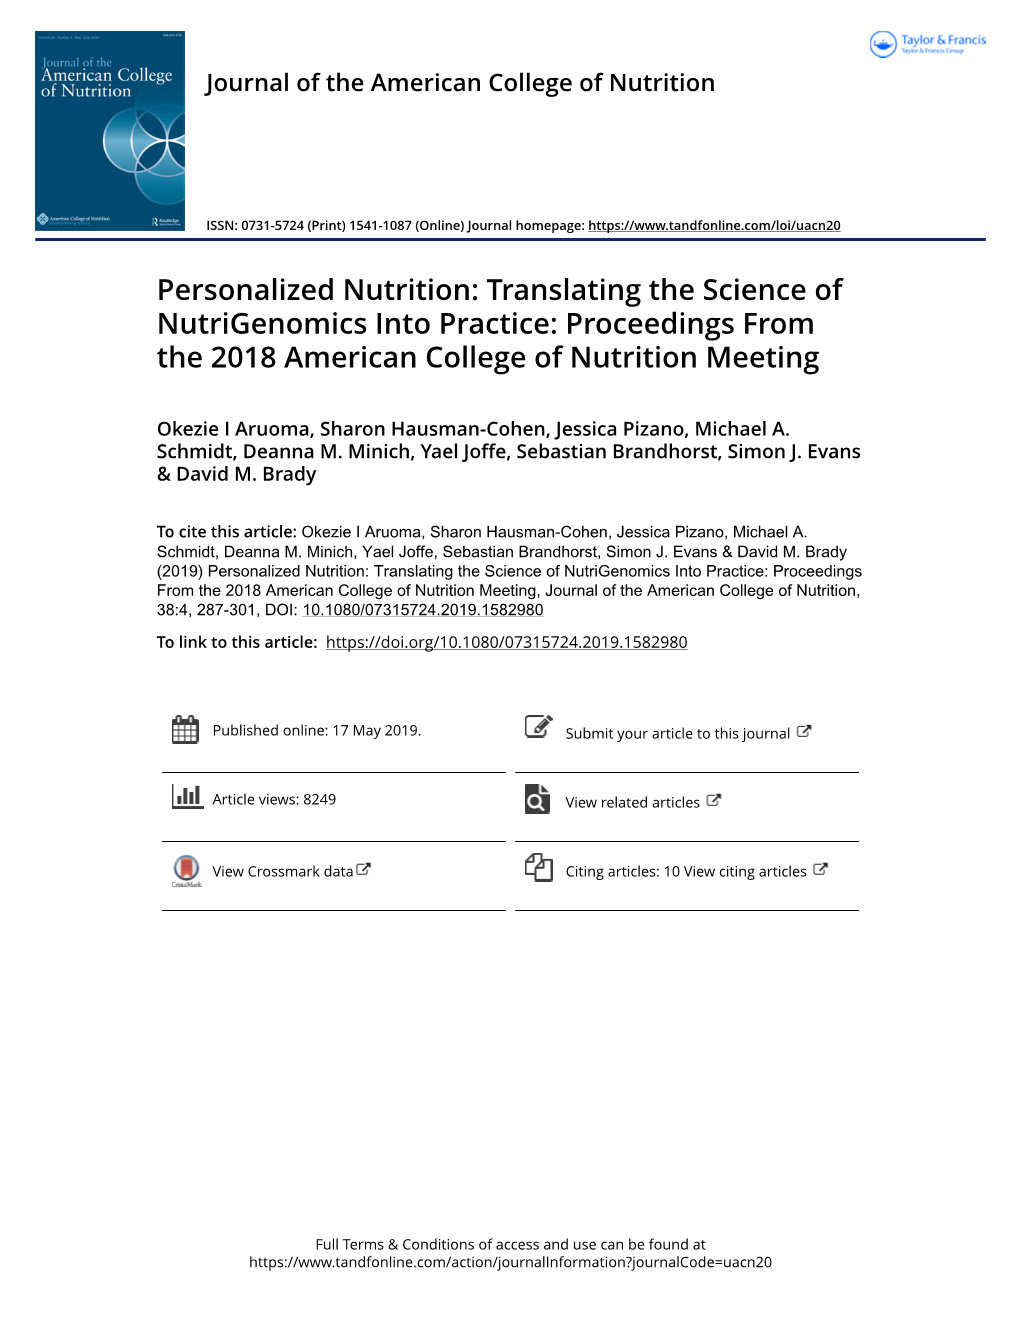 Personalized Nutrition: Translating the Science of Nutrigenomics Into Practice: Proceedings from the 2018 American College of Nutrition Meeting